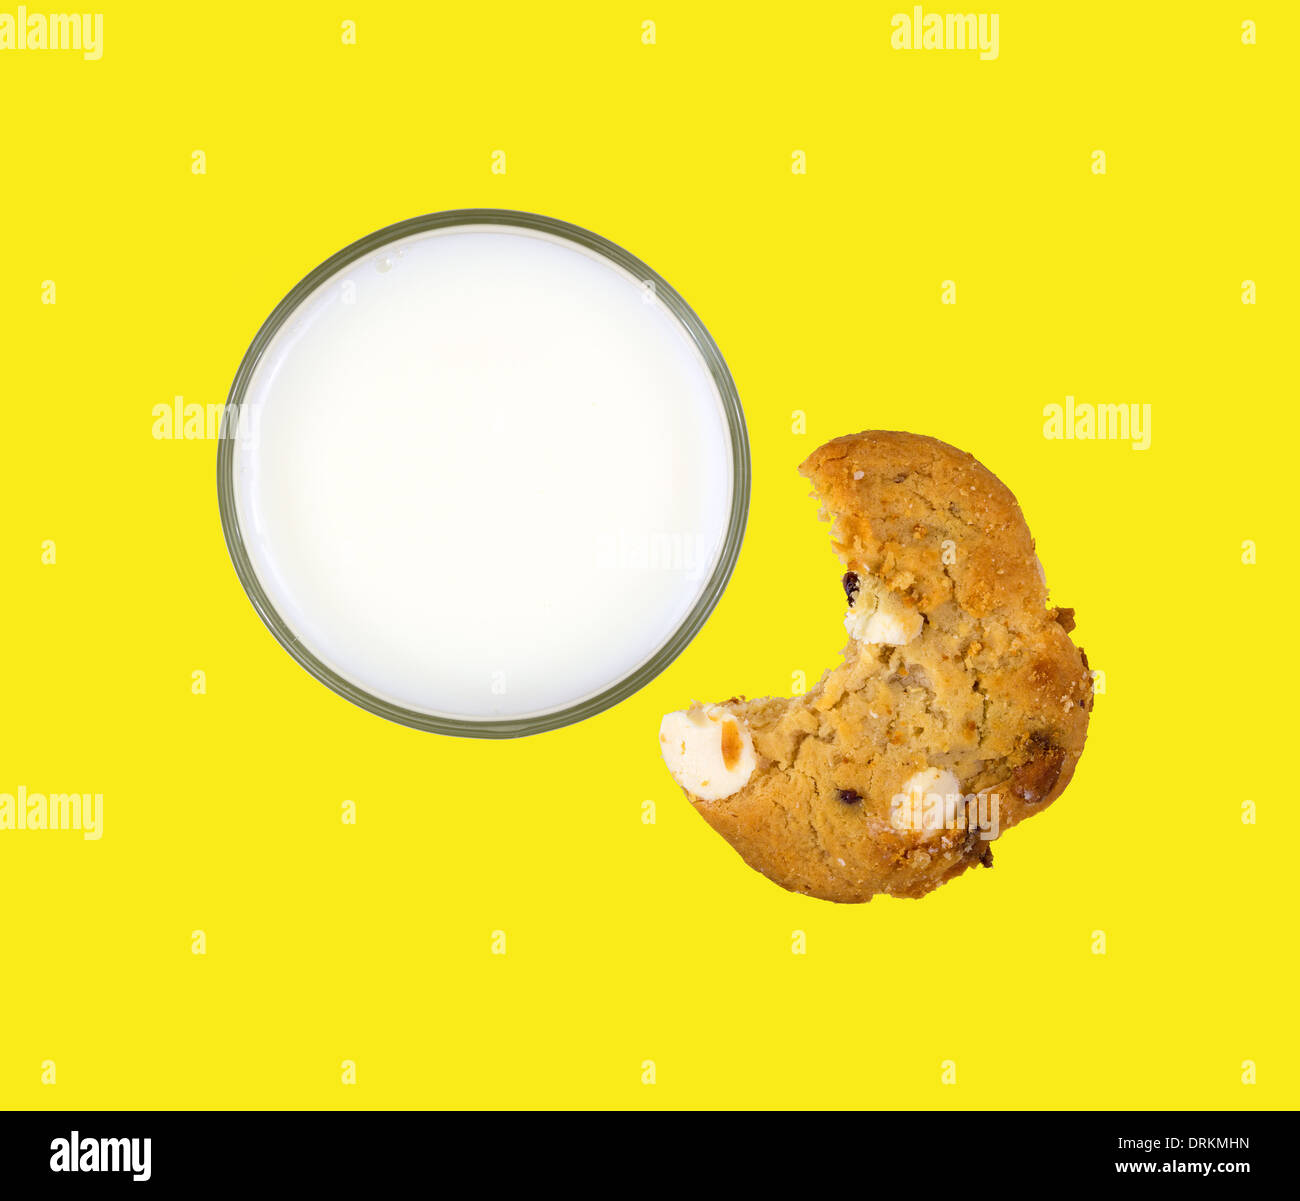 Top view of a glass of skim milk with a partially eaten cookie on a bright yellow background. Stock Photo